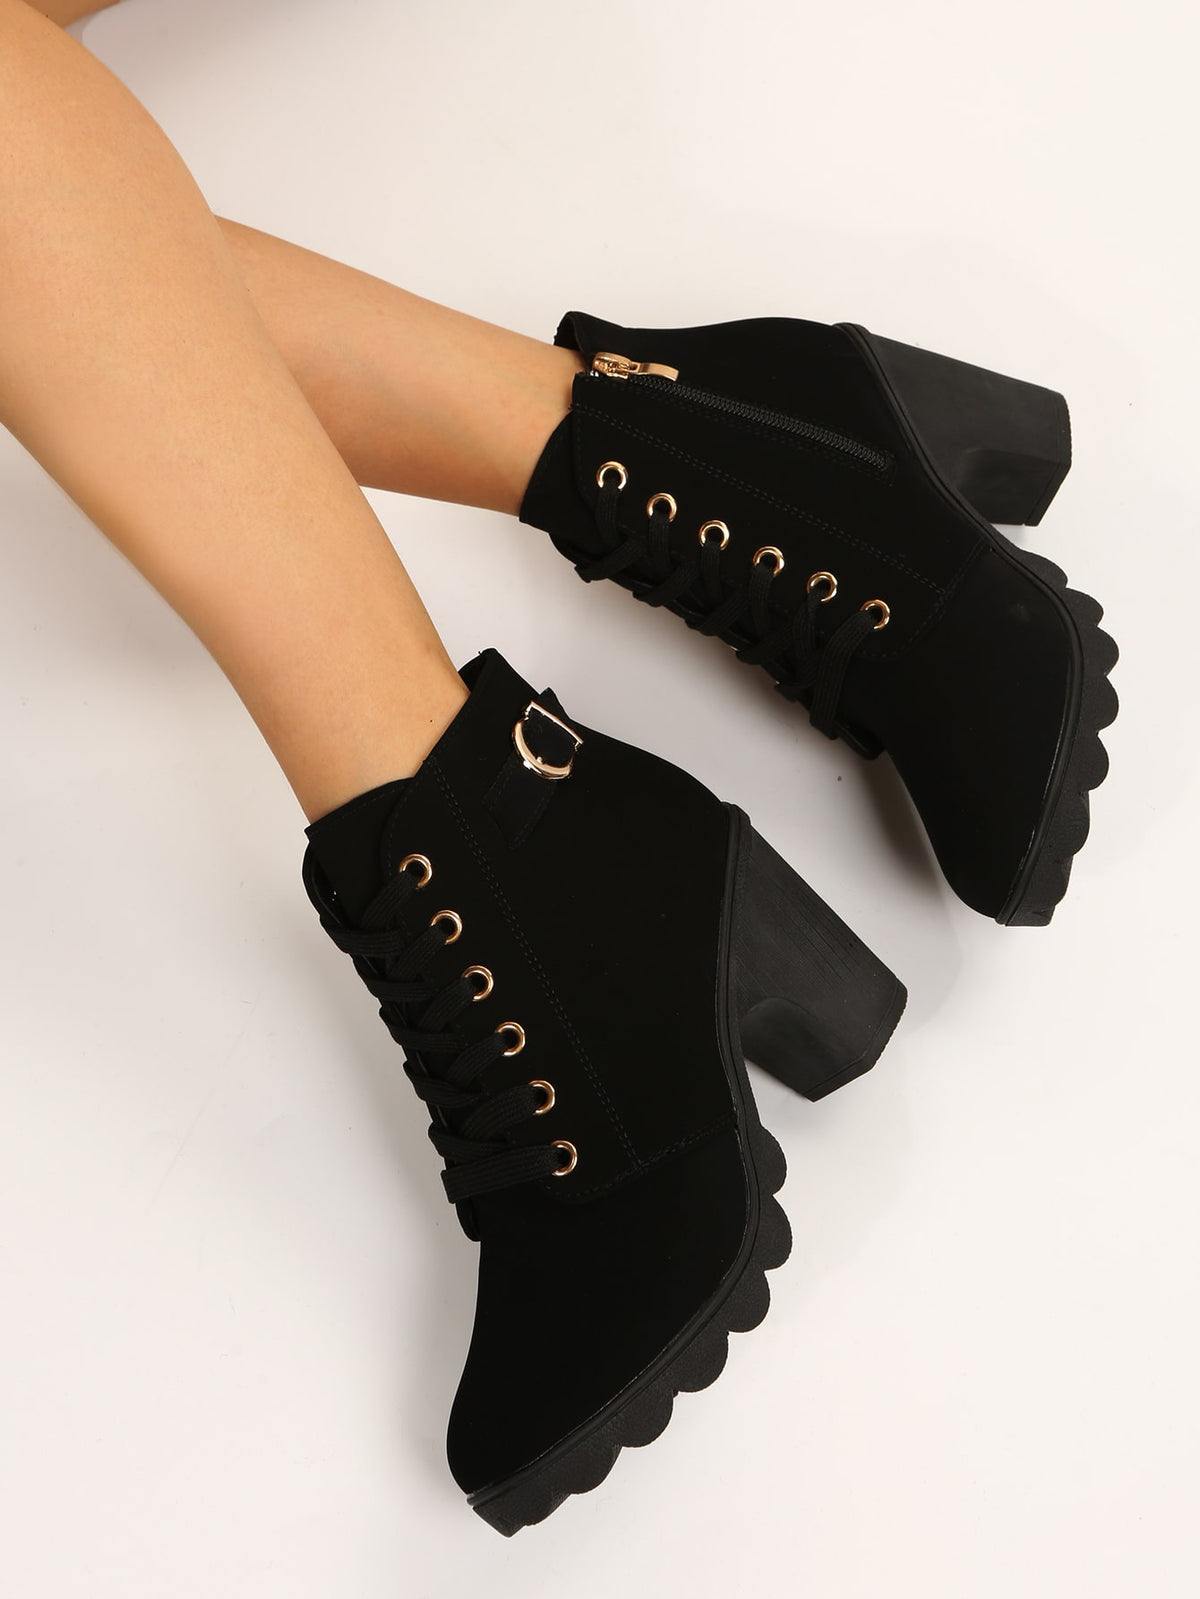 12 Wholesale Women Biker Boots Leather Chunky Heel Combat Military Fashion  Winter Booties Color Black Assorted Size - at - wholesalesockdeals.com